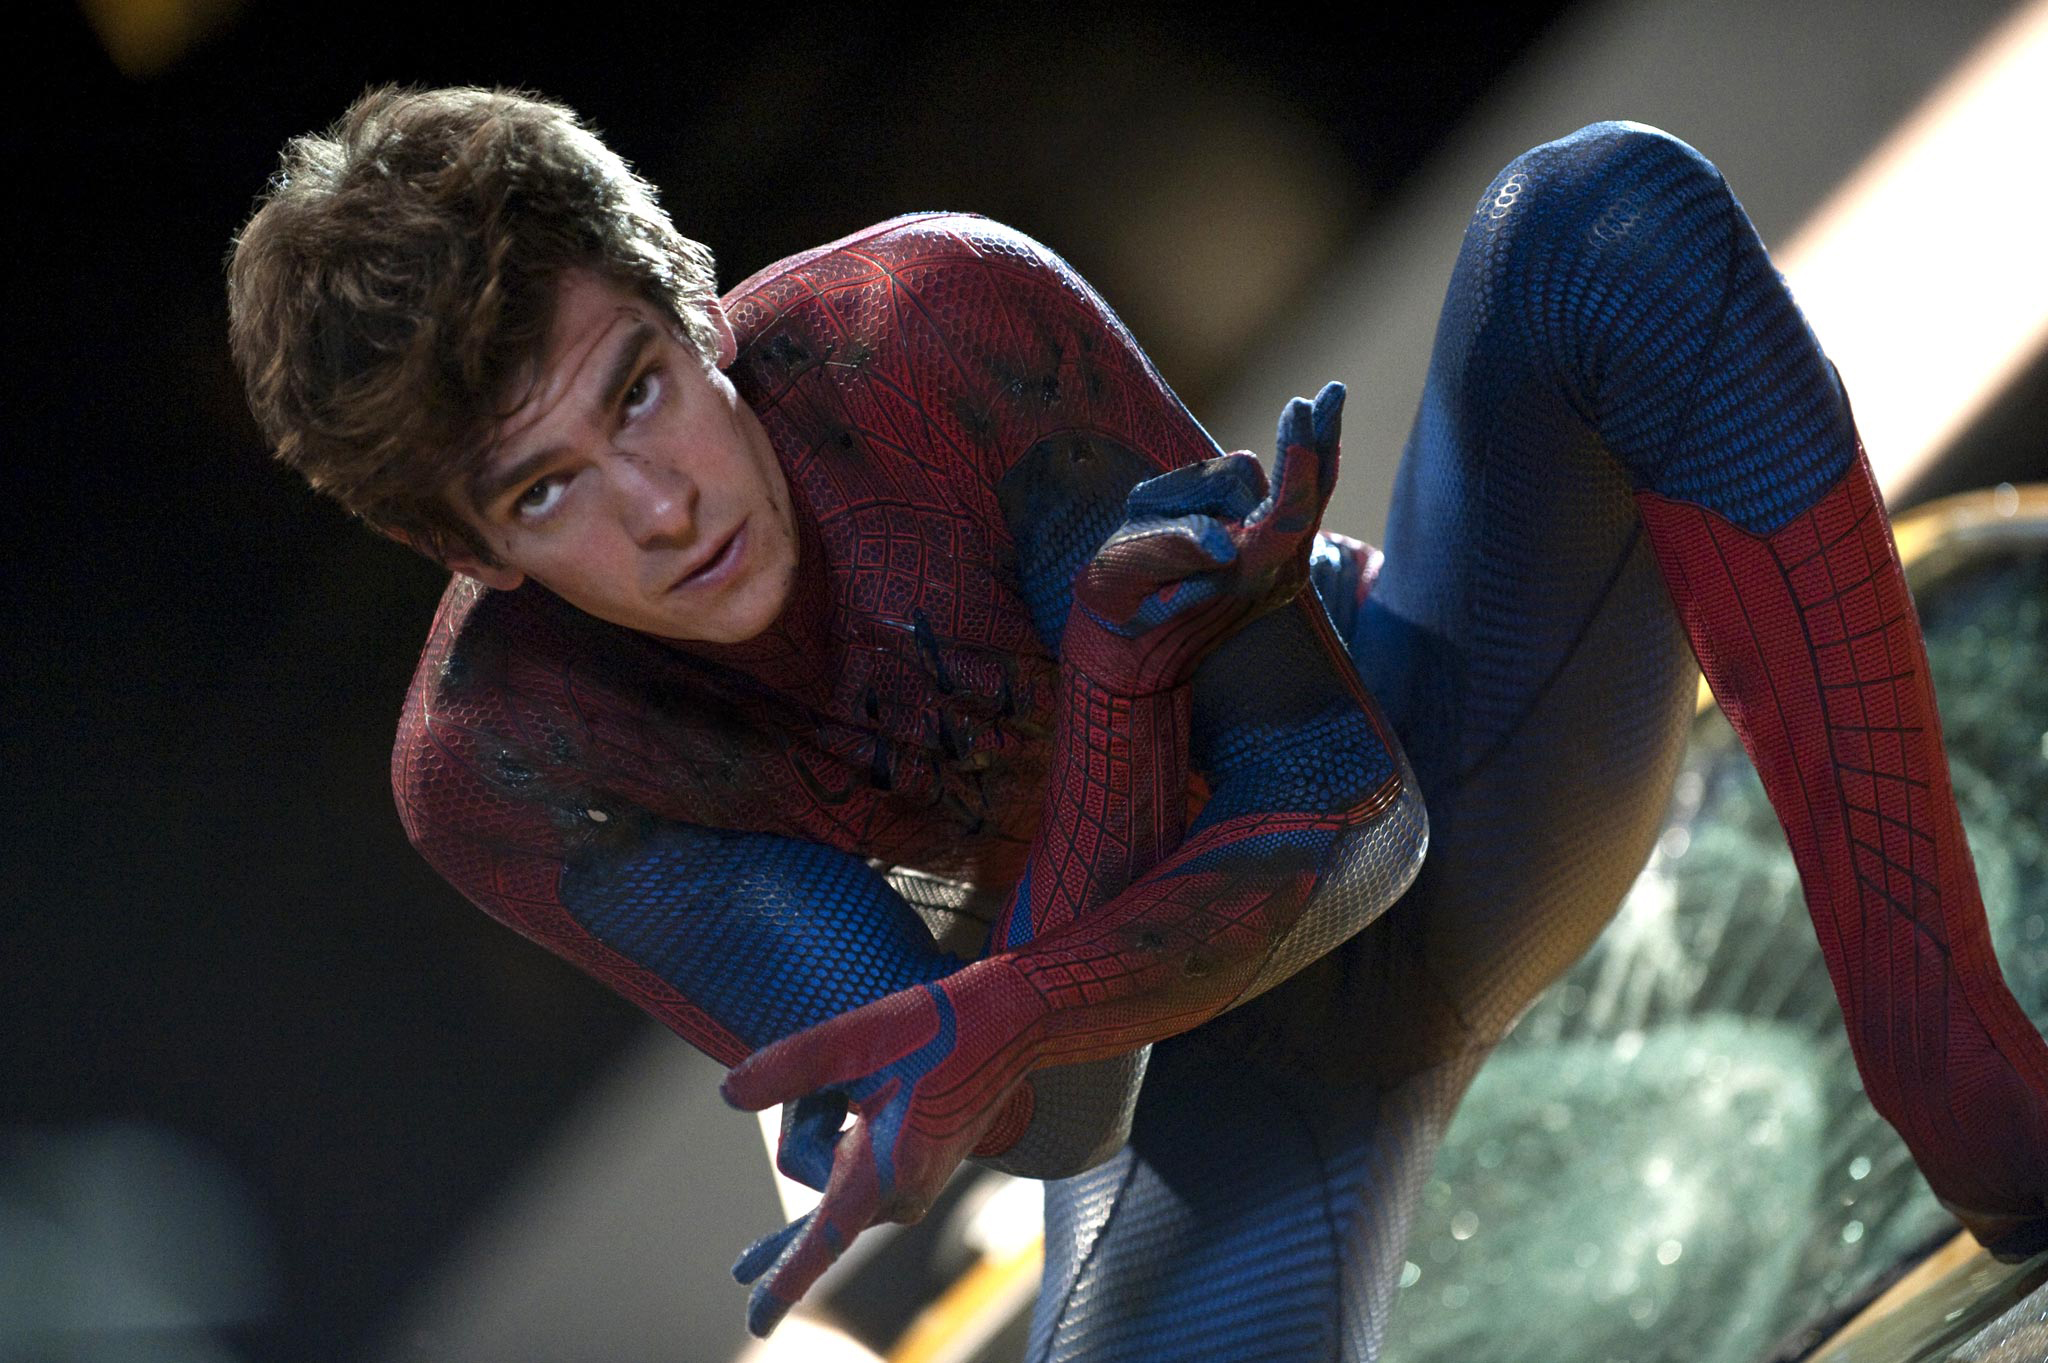 Andrew-Garfield-in-The-Amazing-Spider-Man-2-Costume-No-Mask